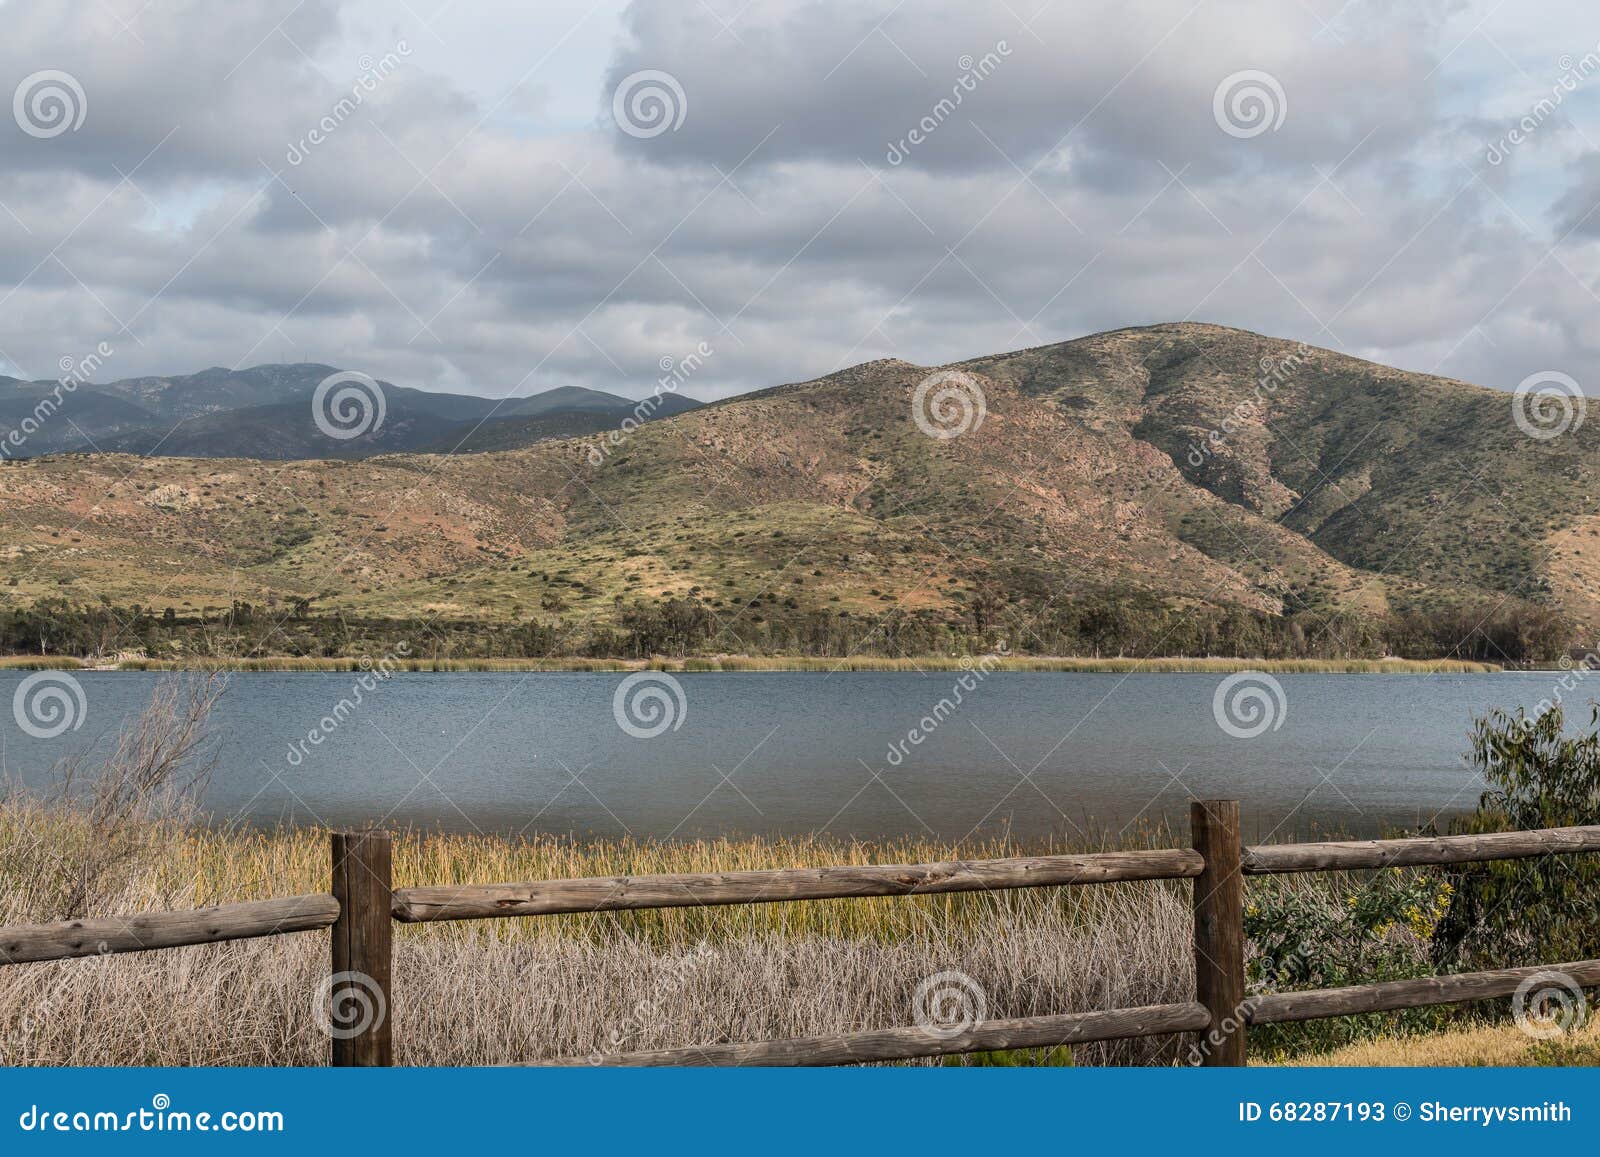 clouds over a mountain range and lake in chula vista, california